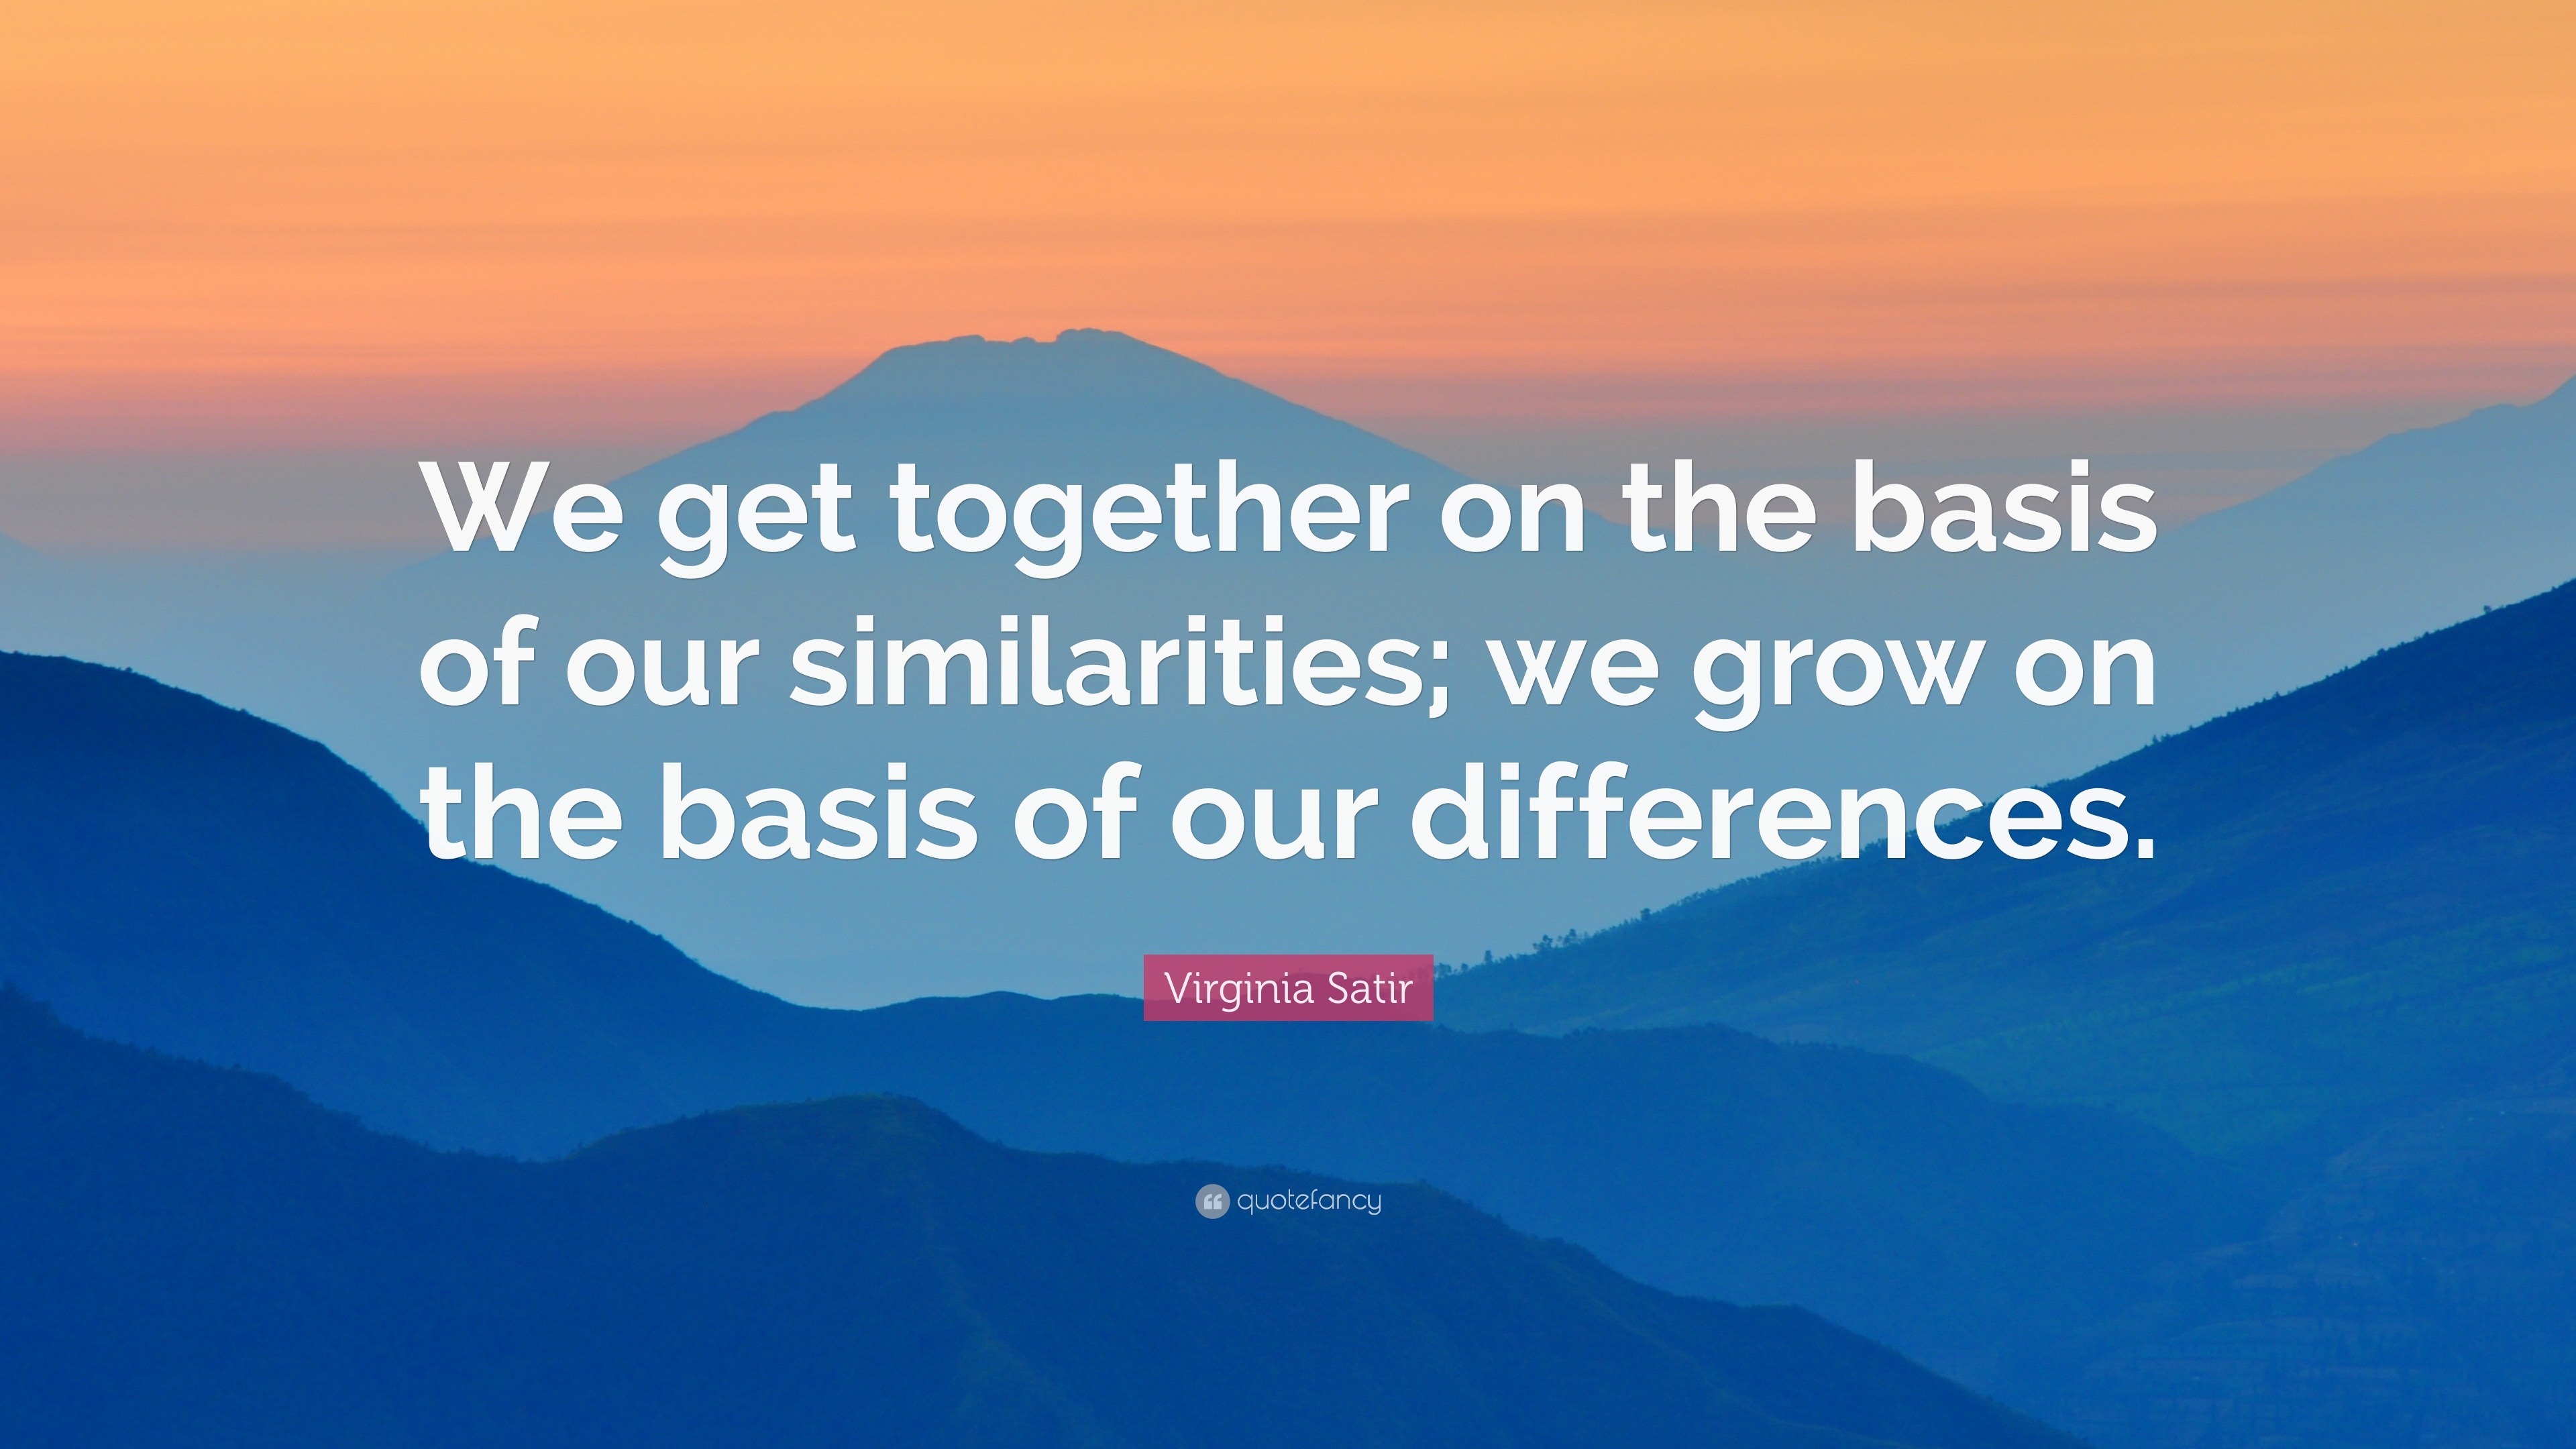 Virginia Satir Quote: “We get together on the basis of our similarities